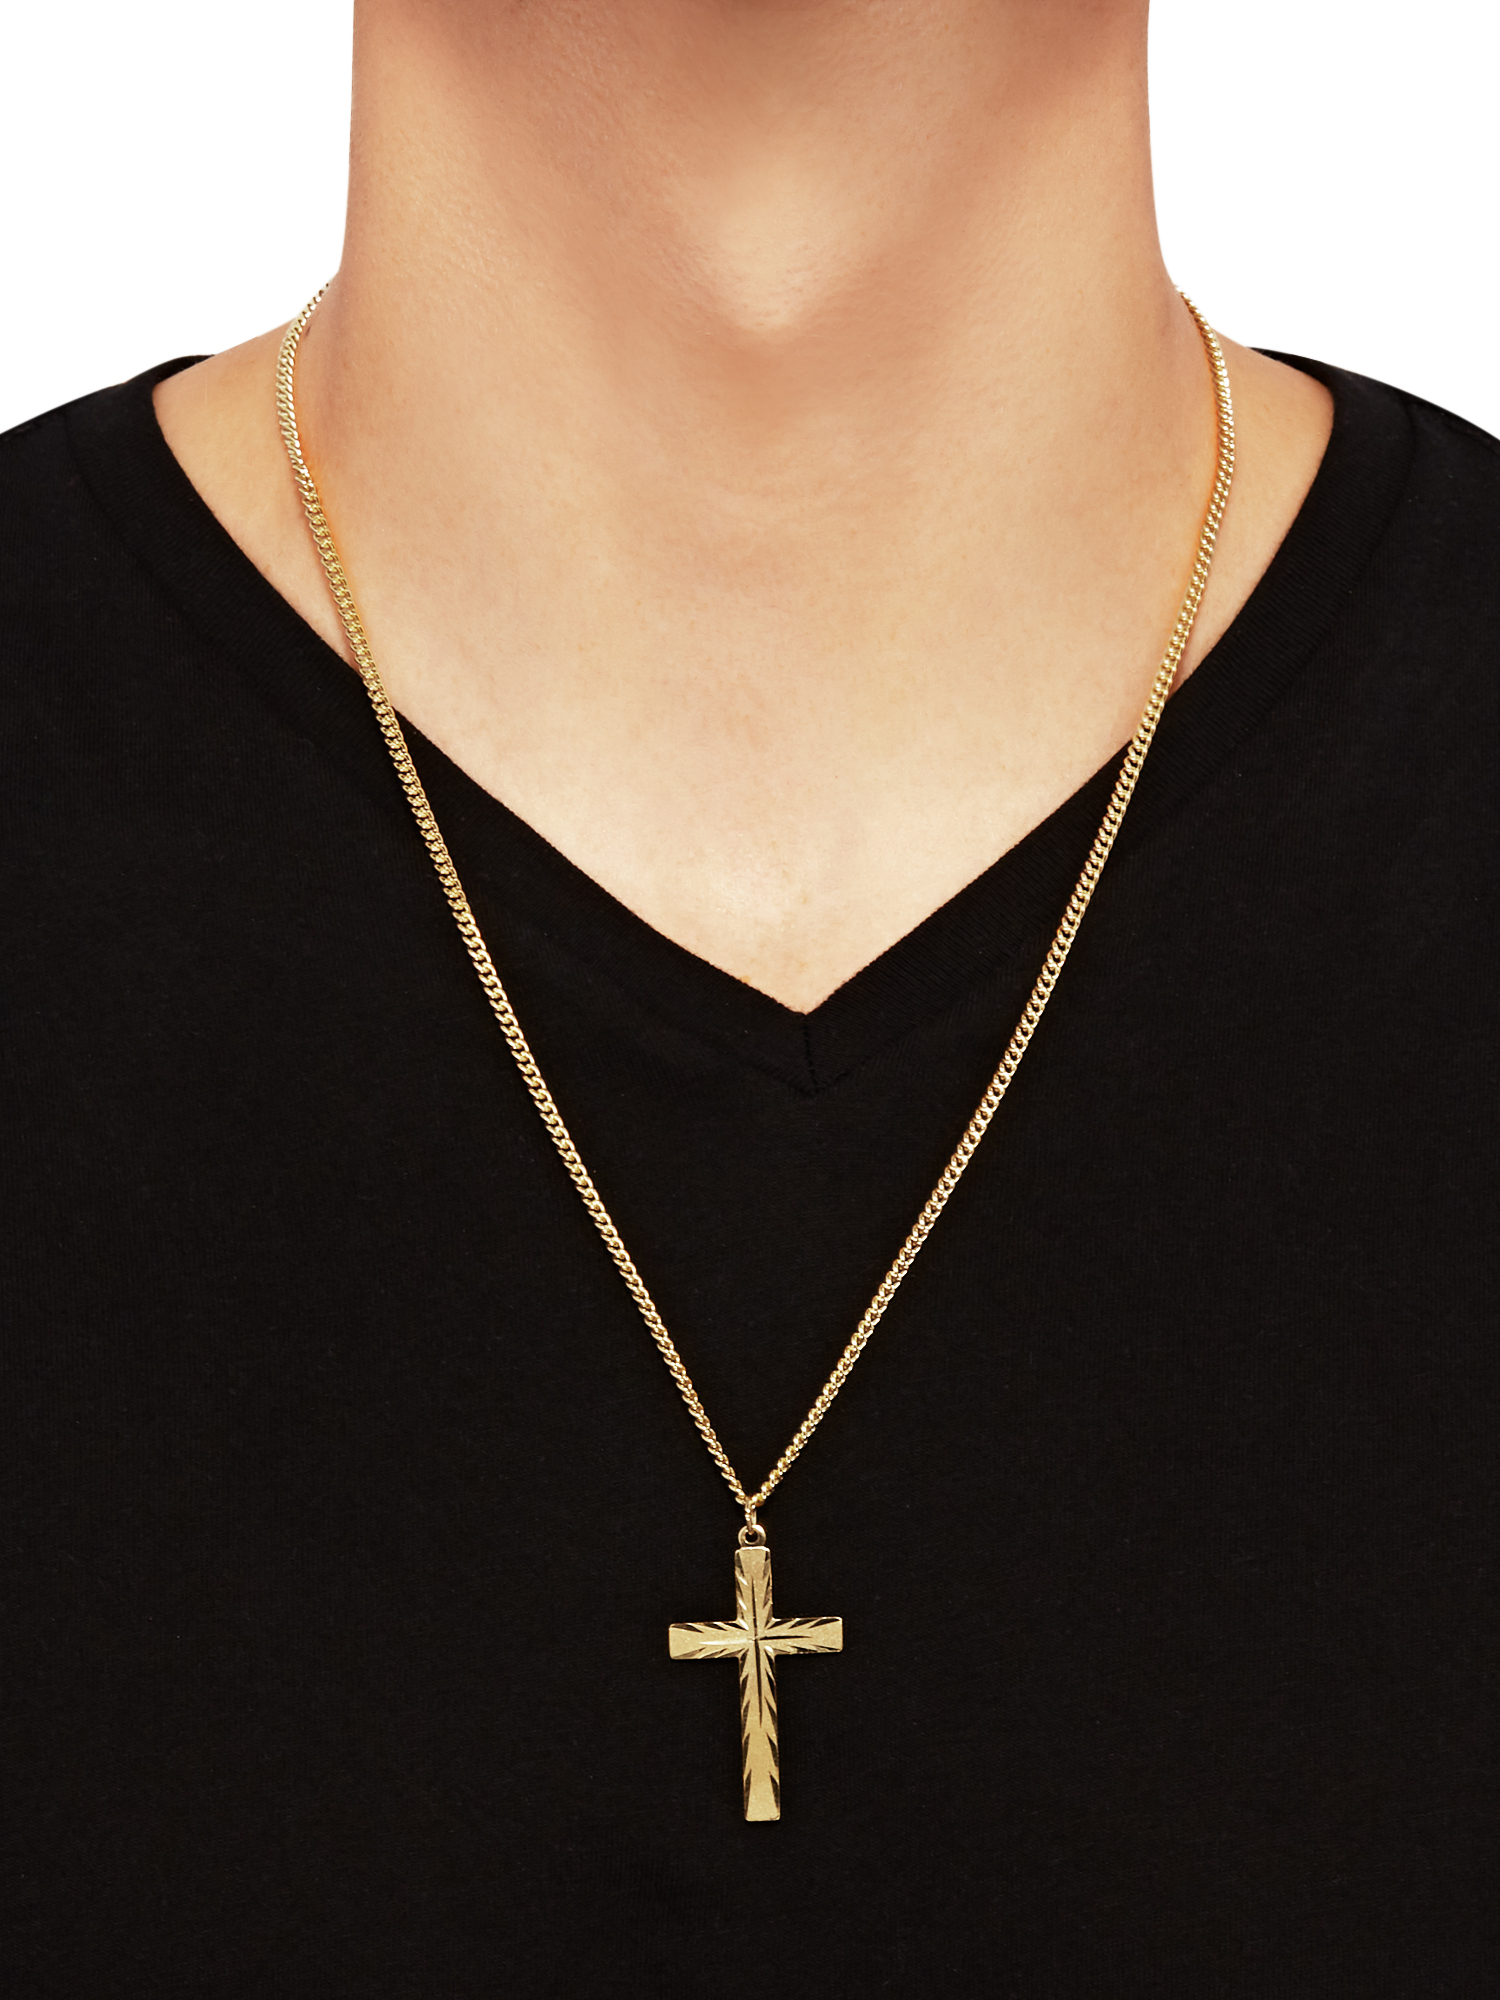 Brilliance Fine Jewelry Gold-Filled Cross Pendant, 24" Stainless Steel Chain - image 2 of 4